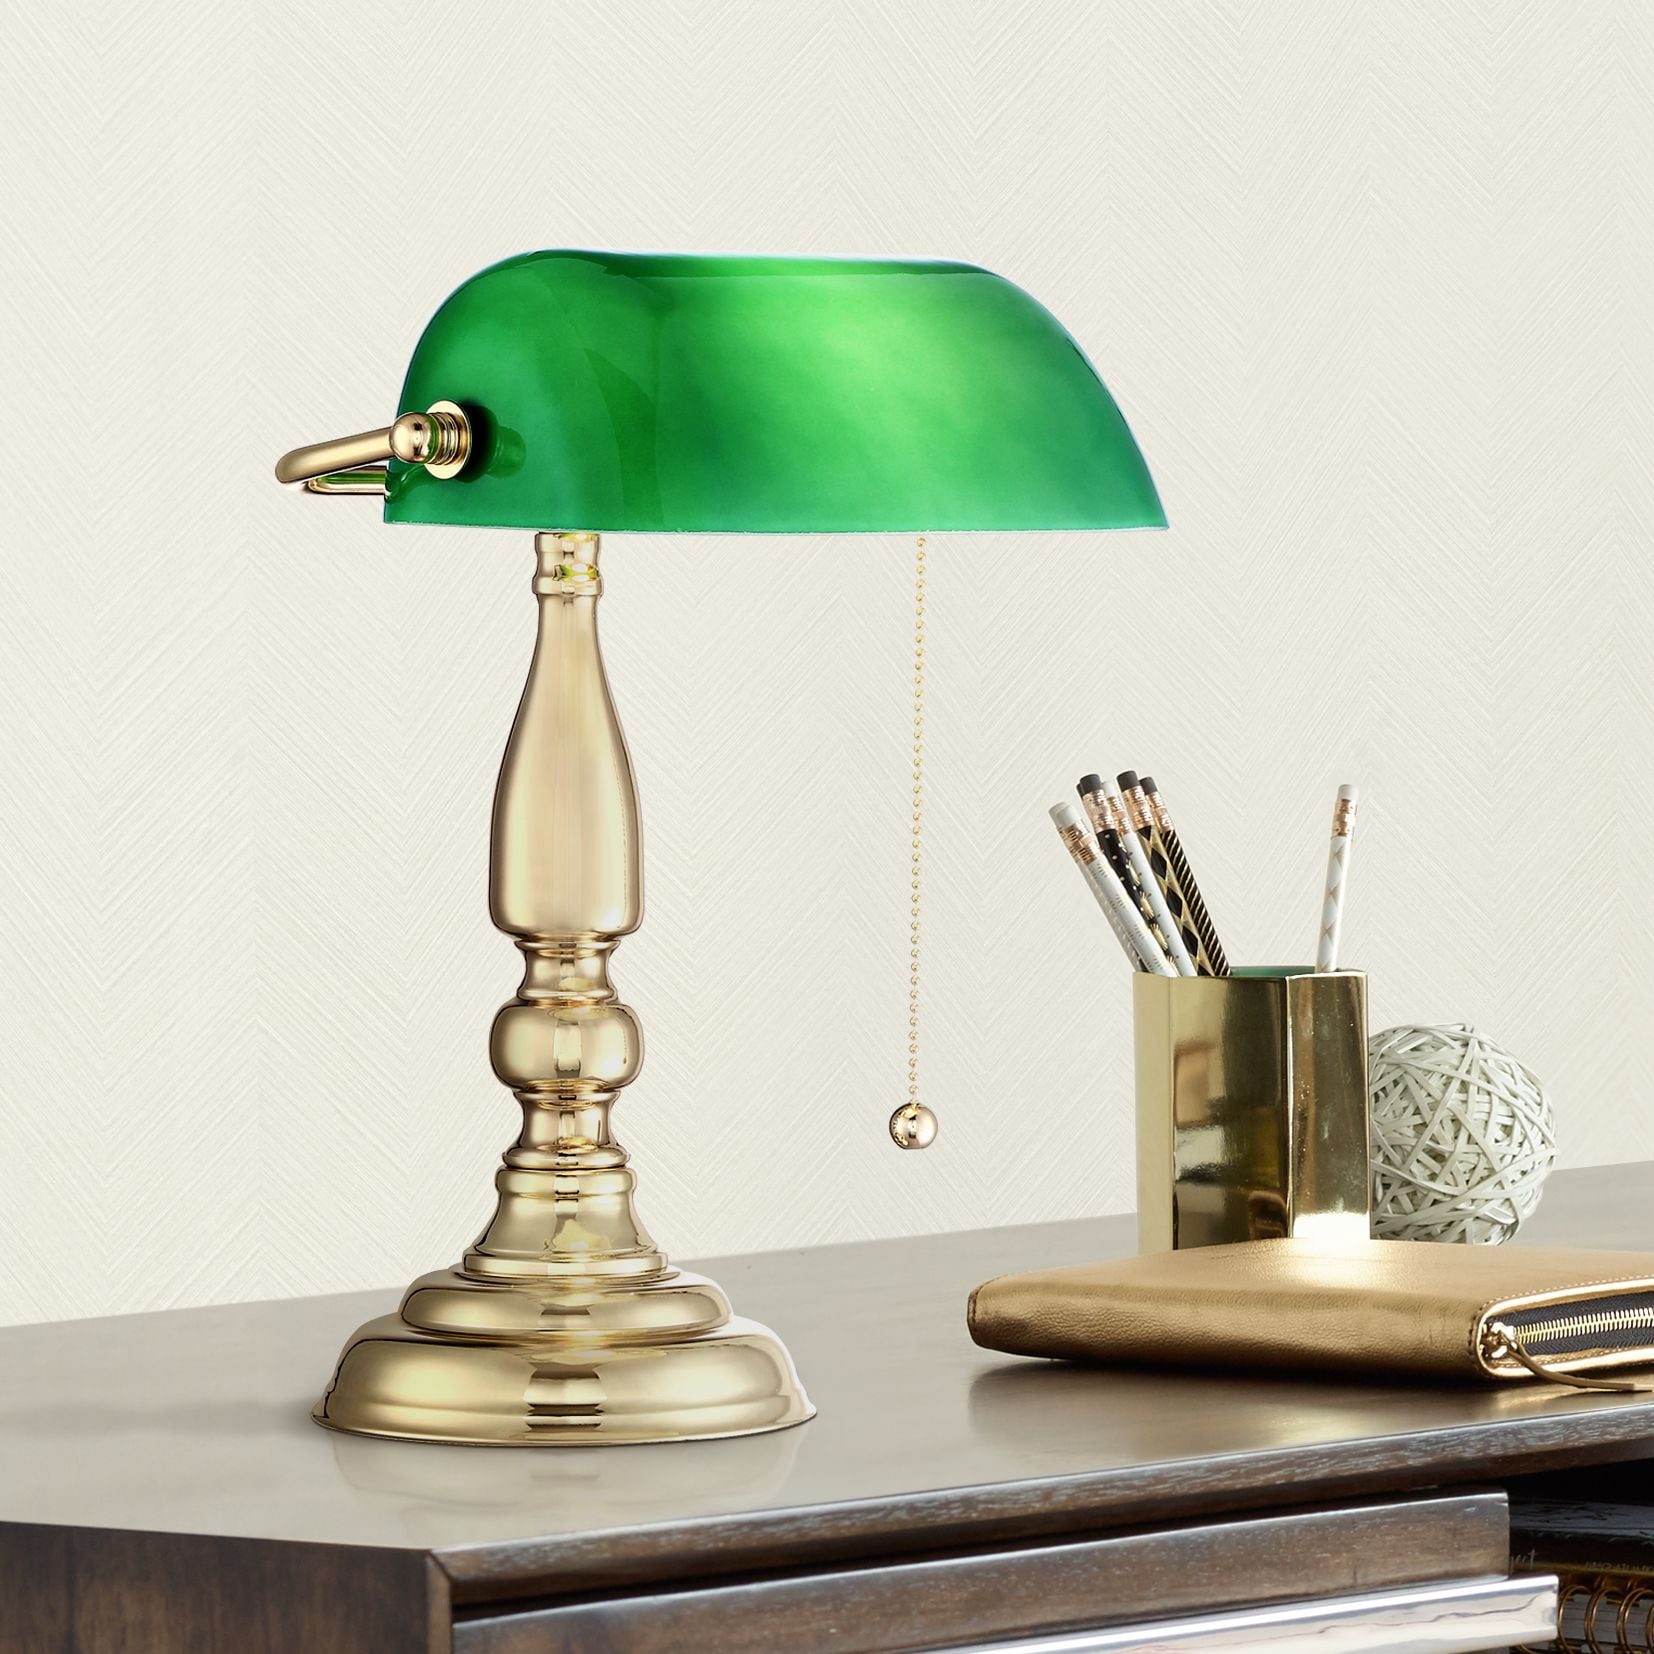 360 Lighting Hammond Traditional Piano Banker Desk Lamp 14 High Brass  Plating Green Glass Shade for Bedroom Bedside Nightstand Office Kids House  Home